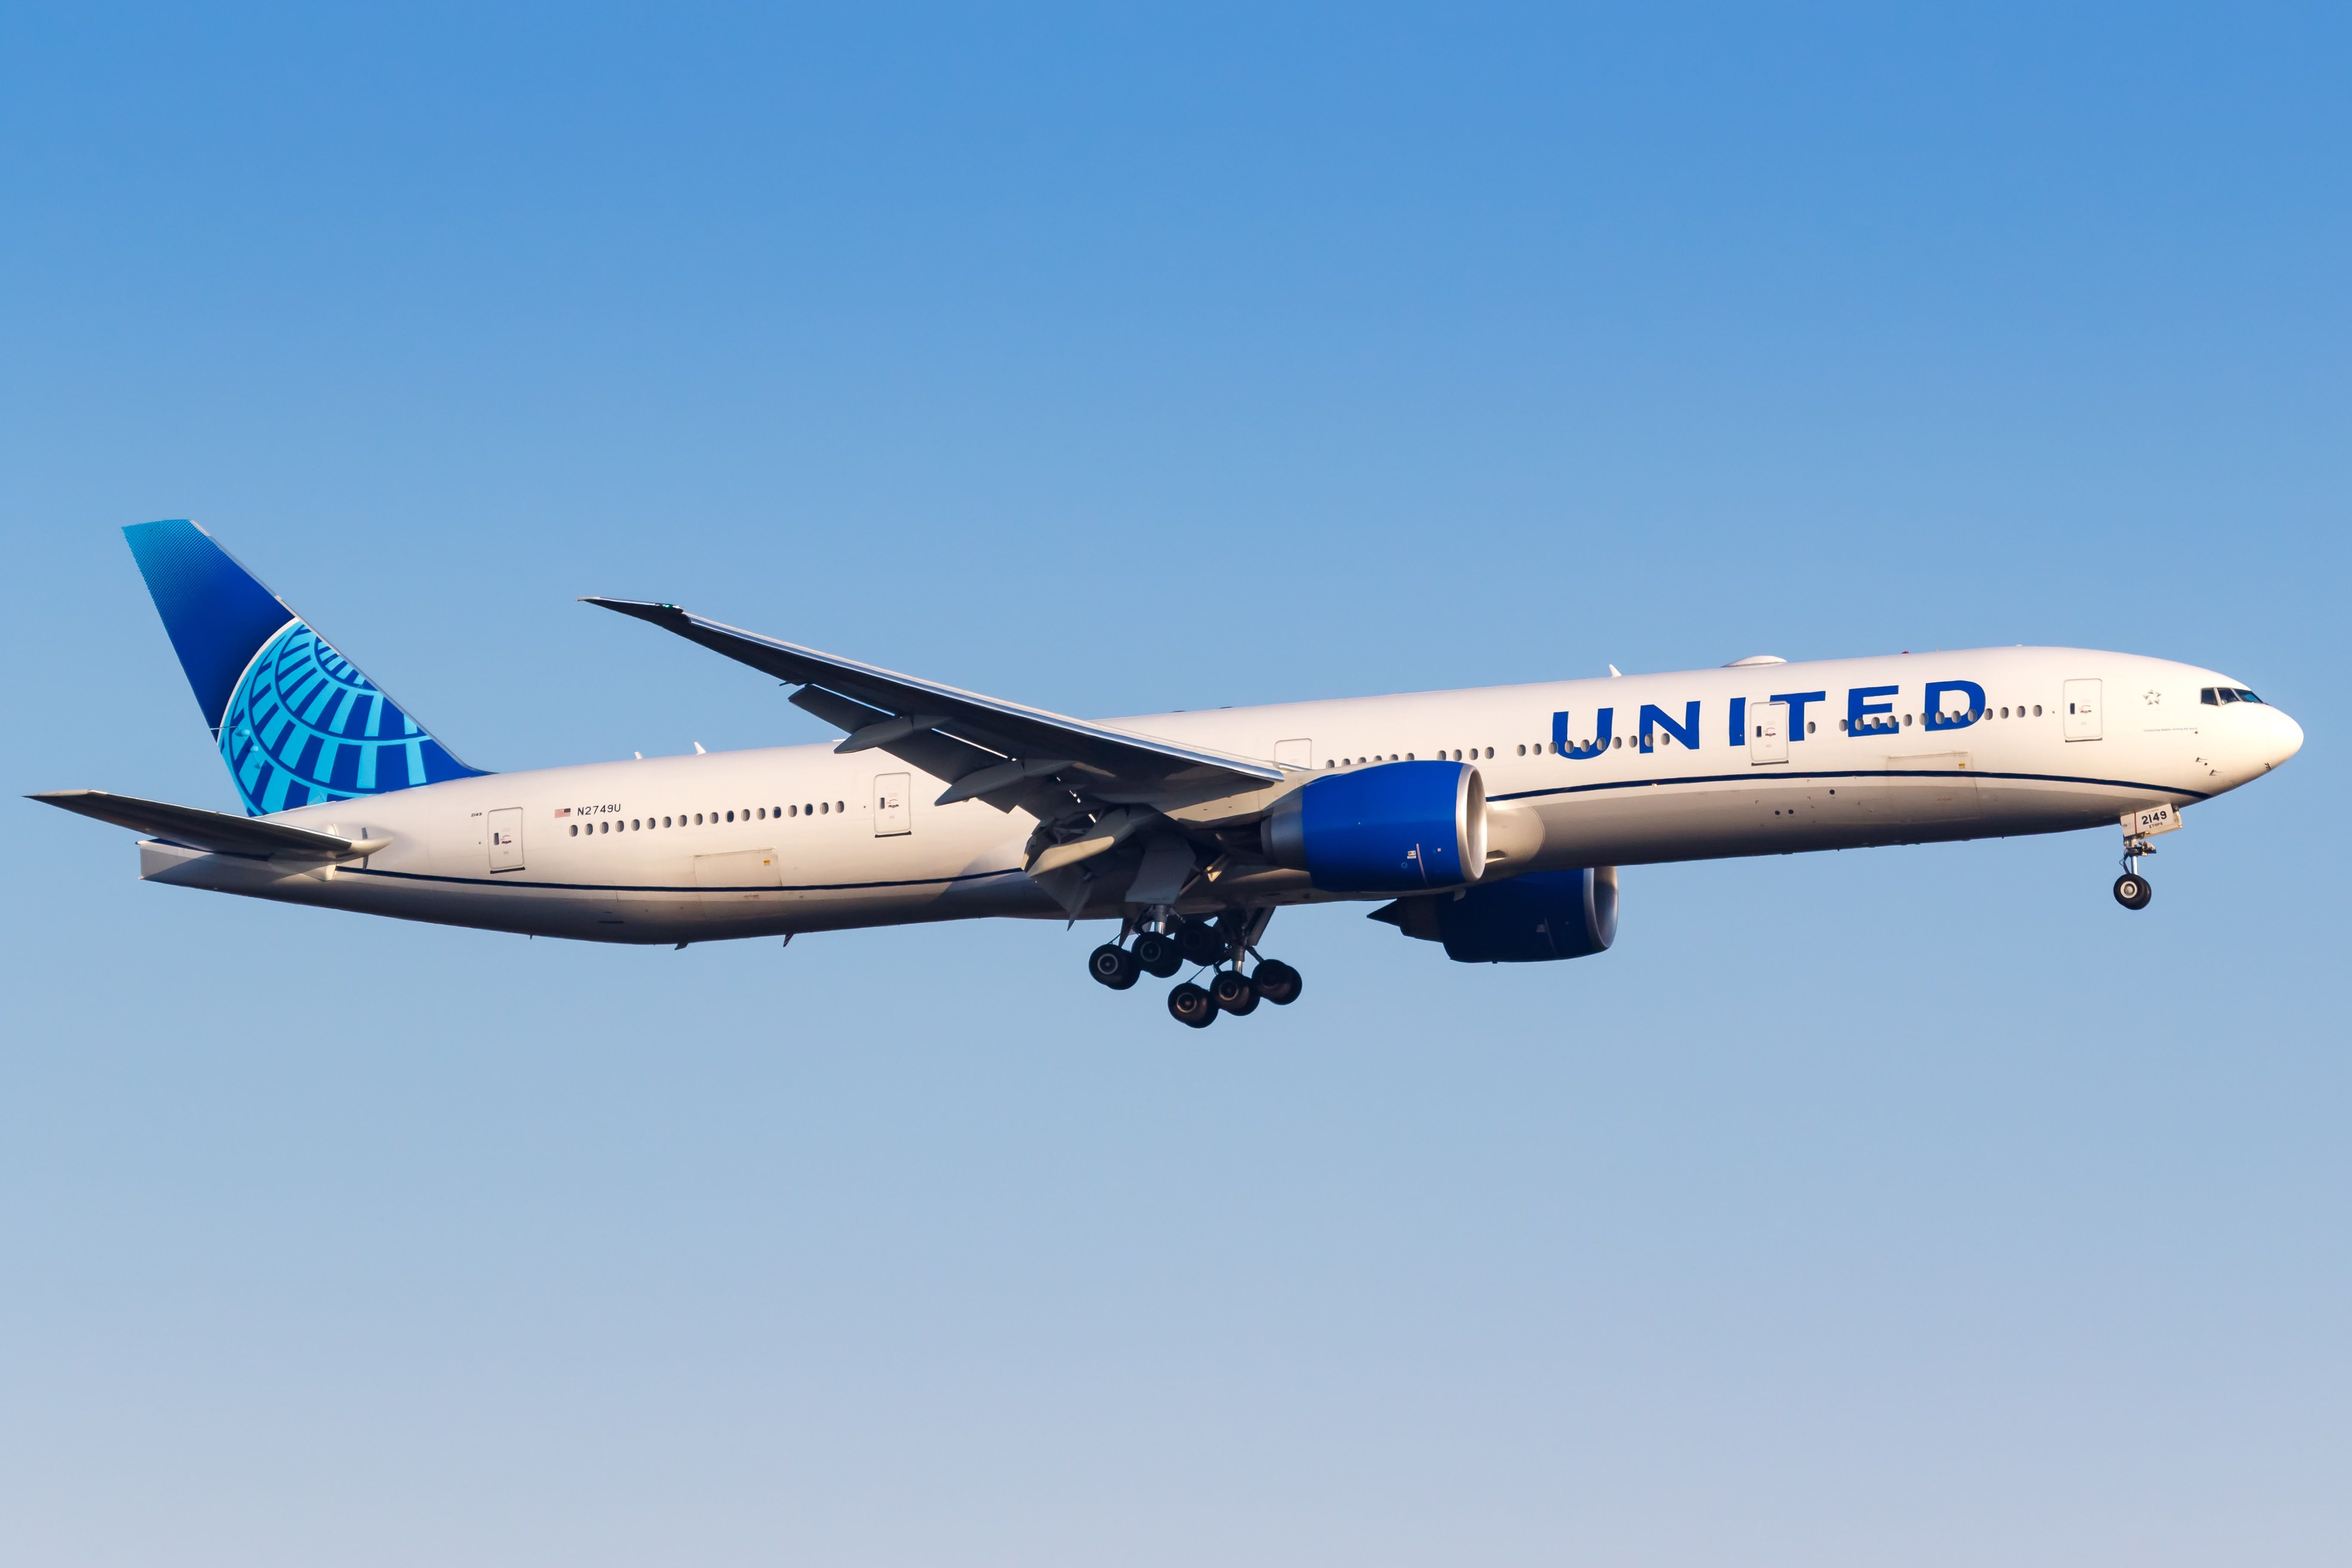 A United Airlines 777-300ER on final approach